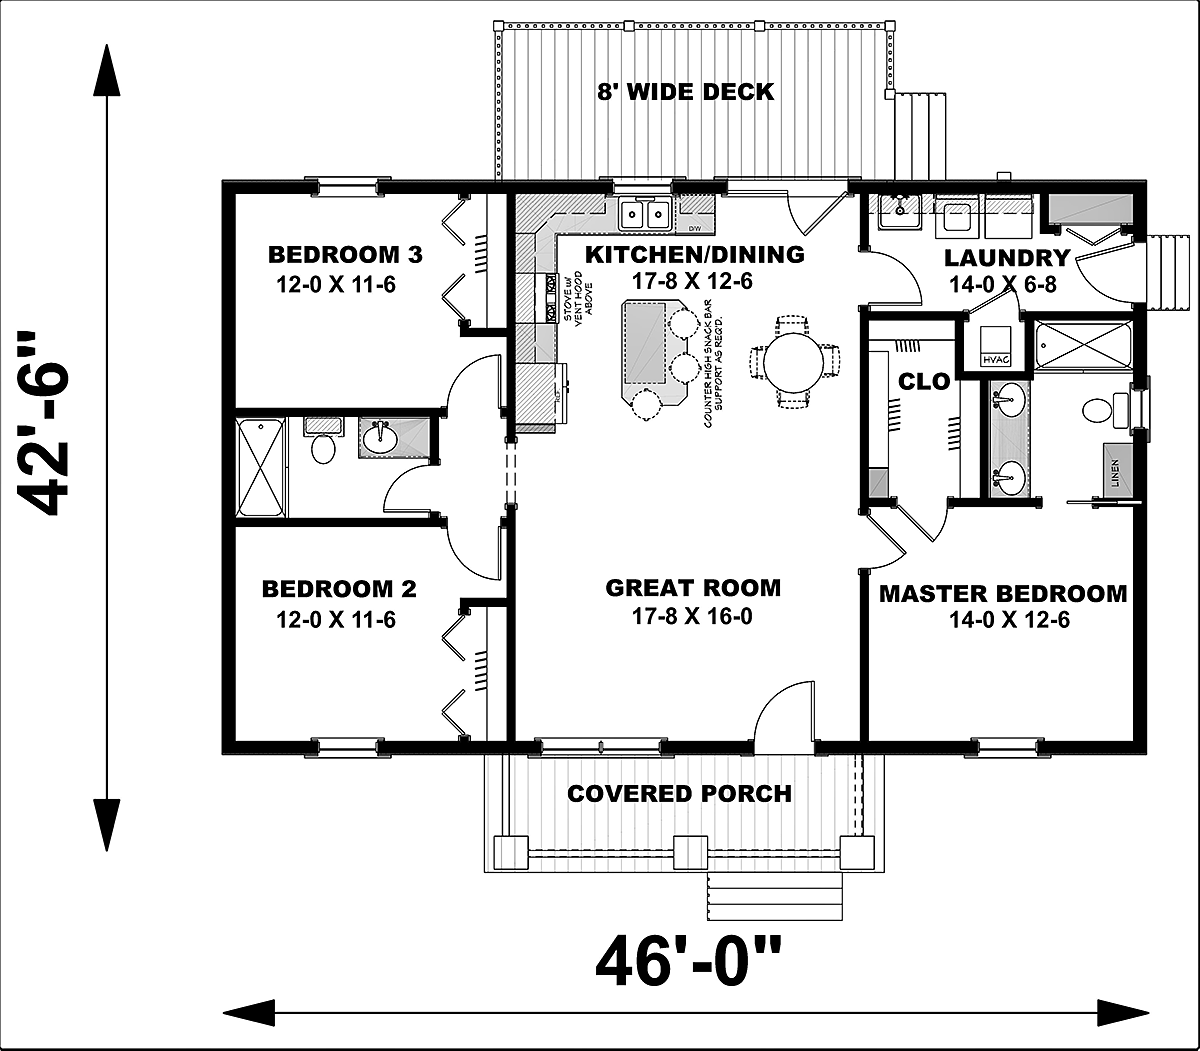 COOL House Plans and Home Floor Plans